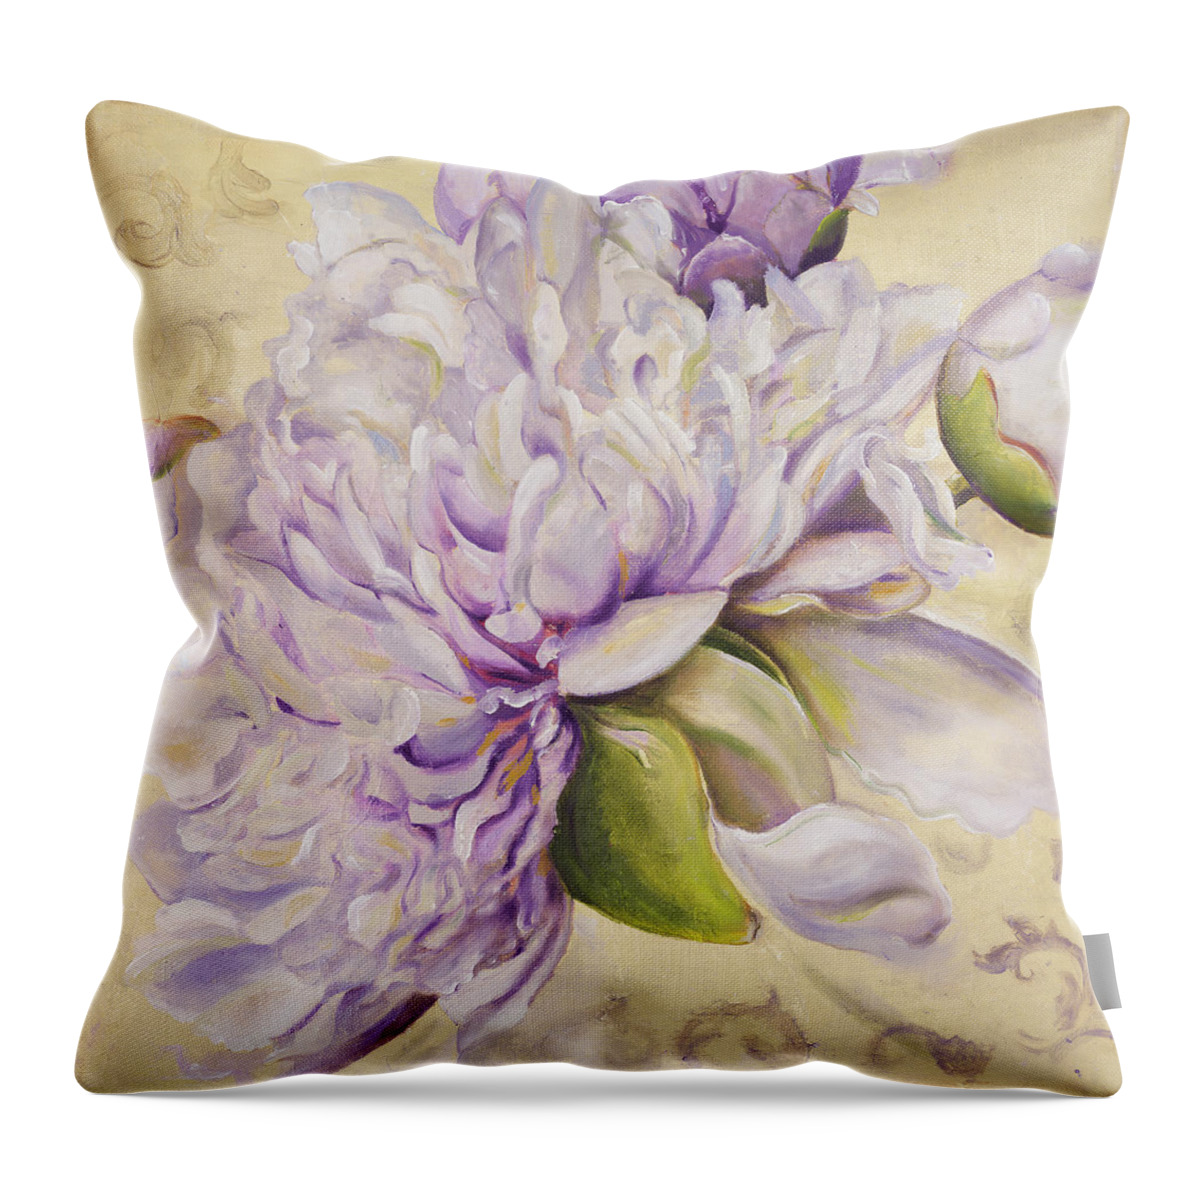 Hydrangeas Throw Pillow featuring the painting In Bloom I by Patricia Pinto